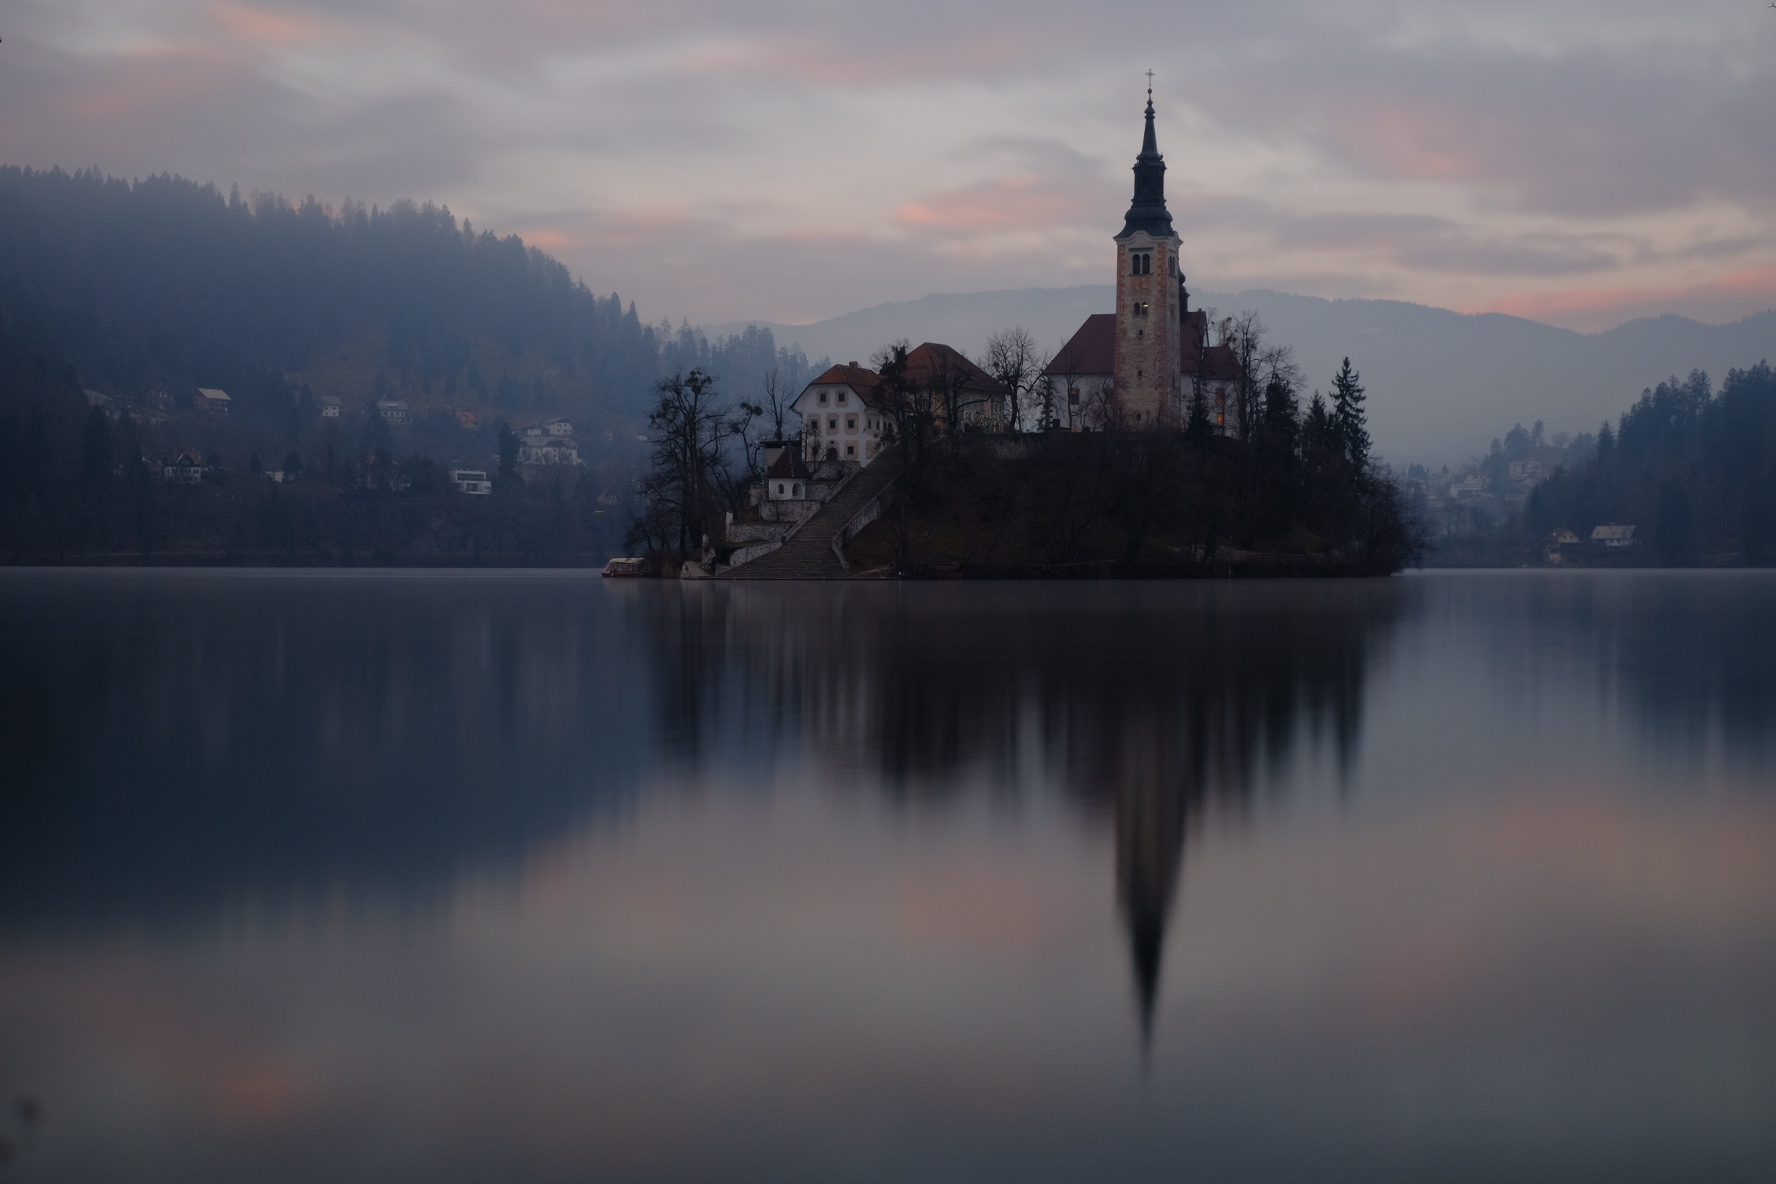 Bled traveling...